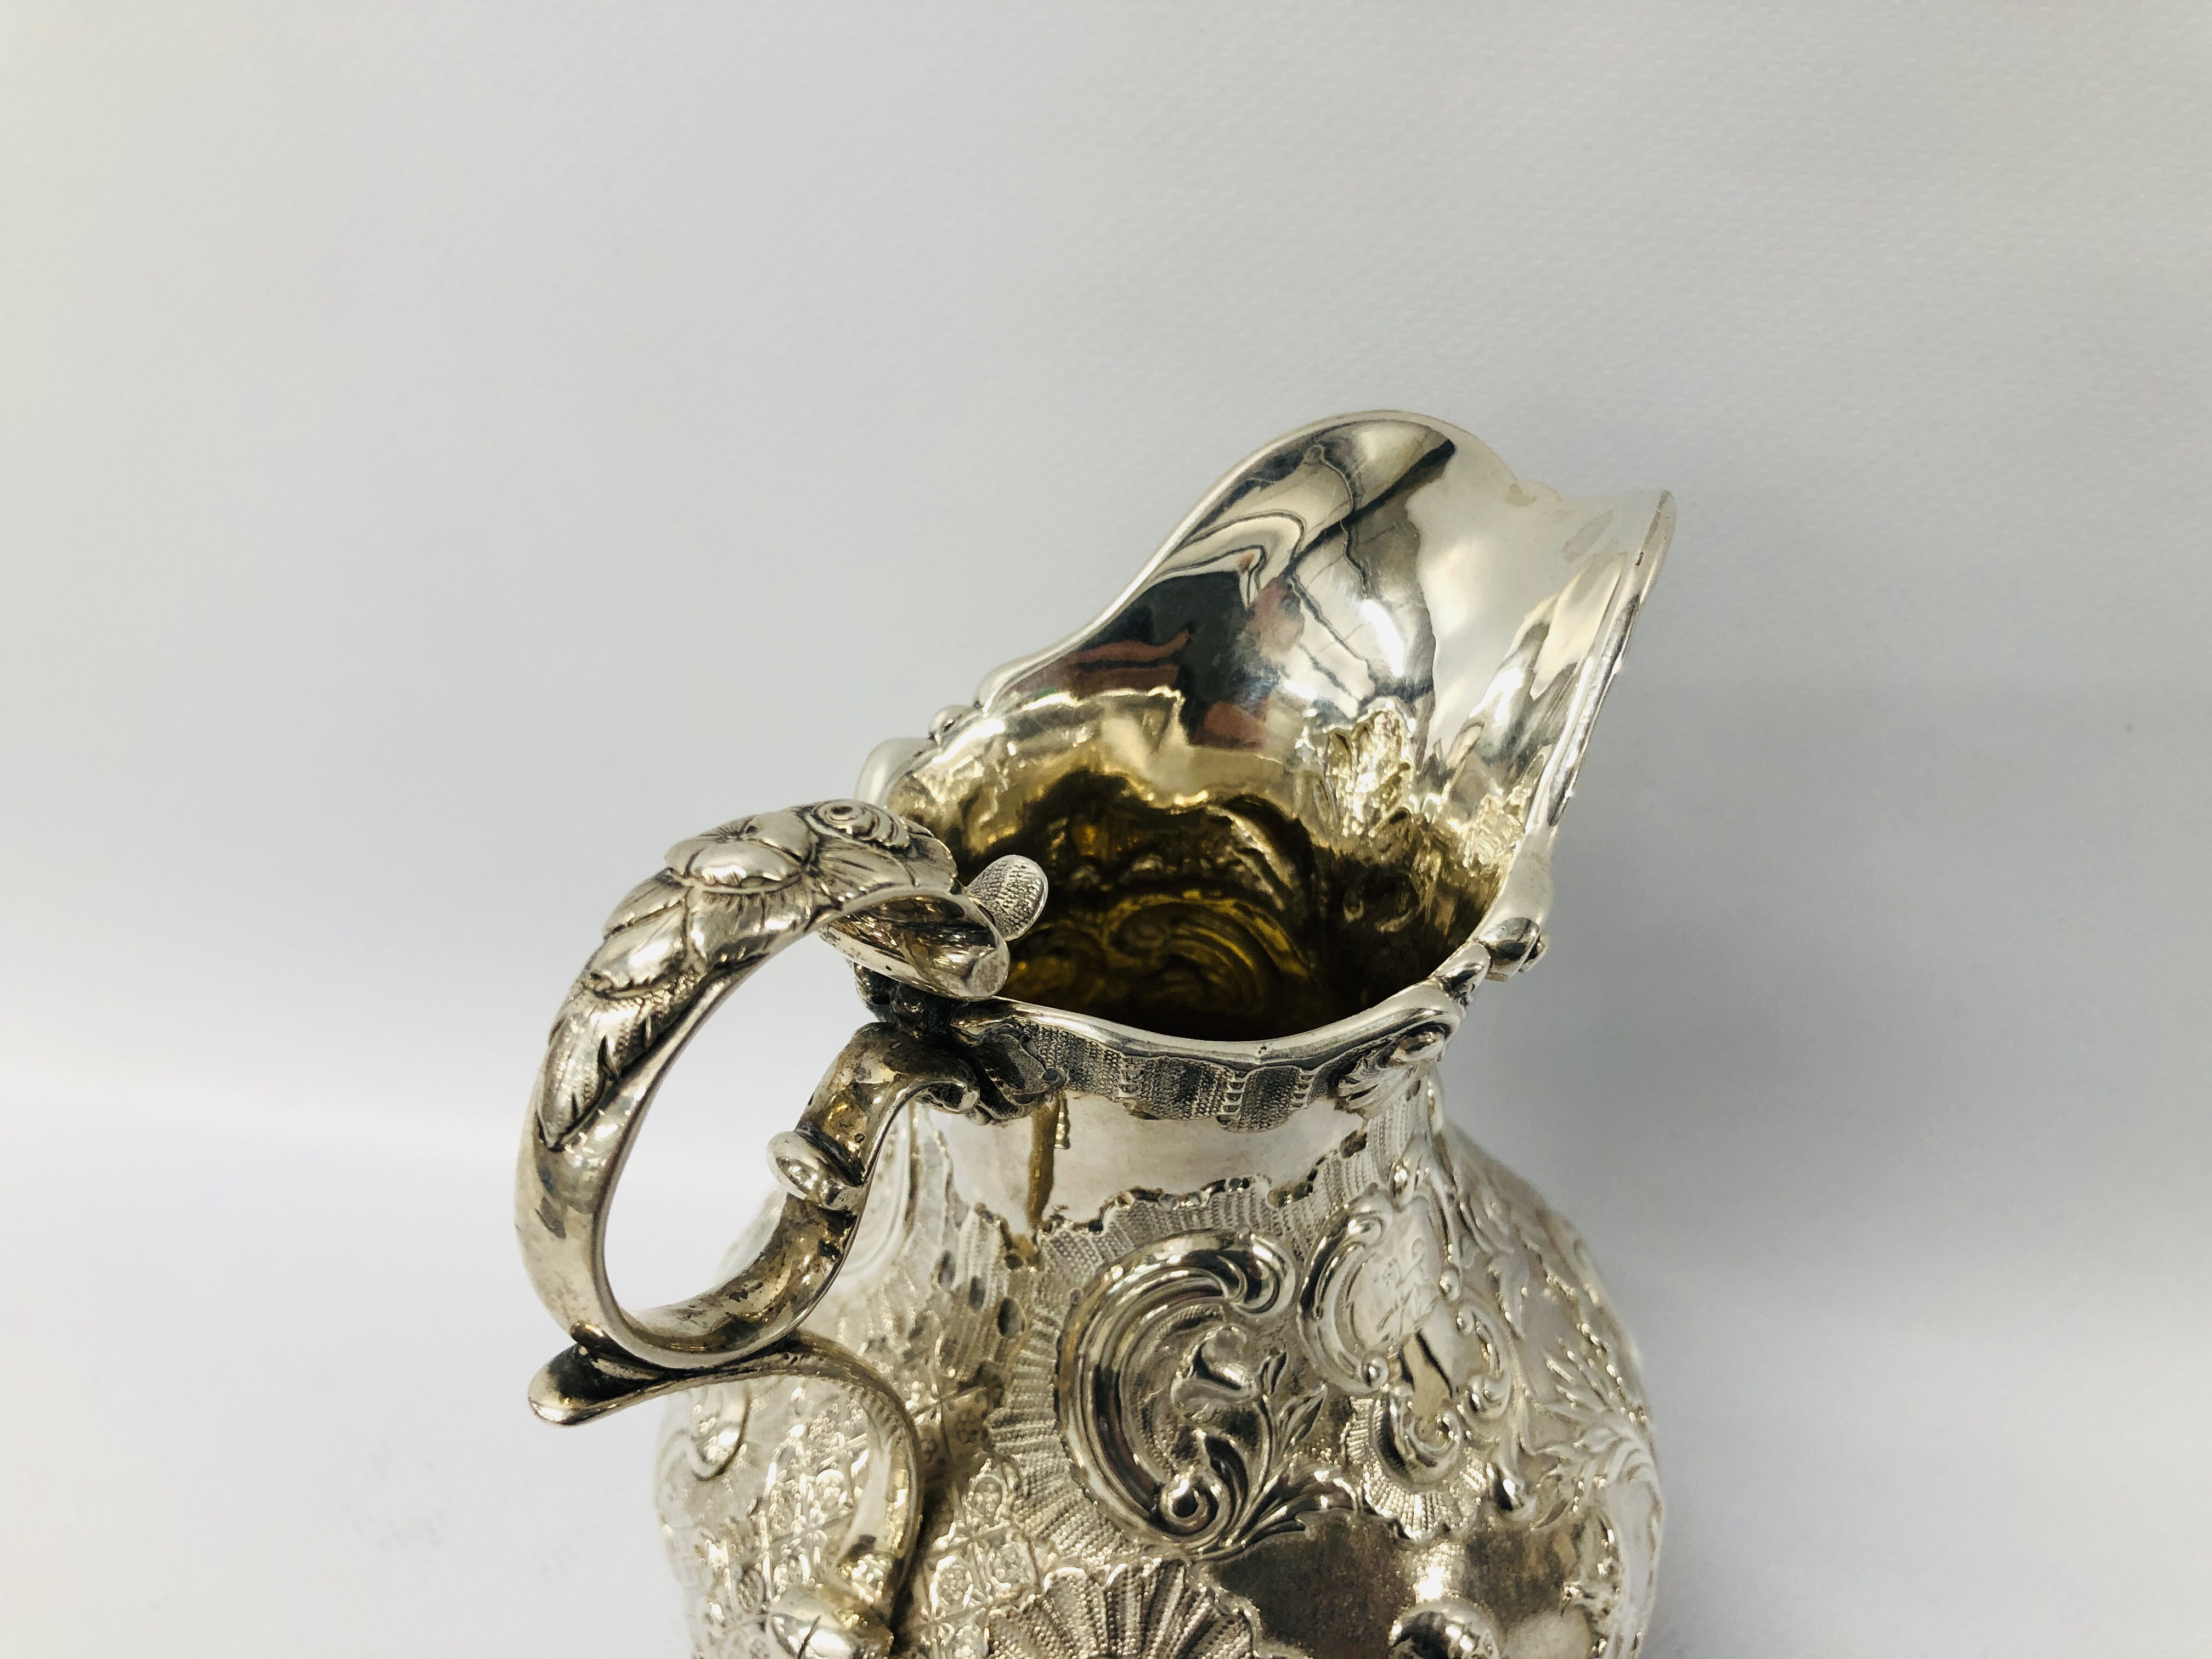 A SILVER MILK JUG OF ROCOCO DESIGN DECORATED WITH CHINOISERIE FIGURES WITH INSCRIPTION MR AND MRS J. - Image 11 of 25